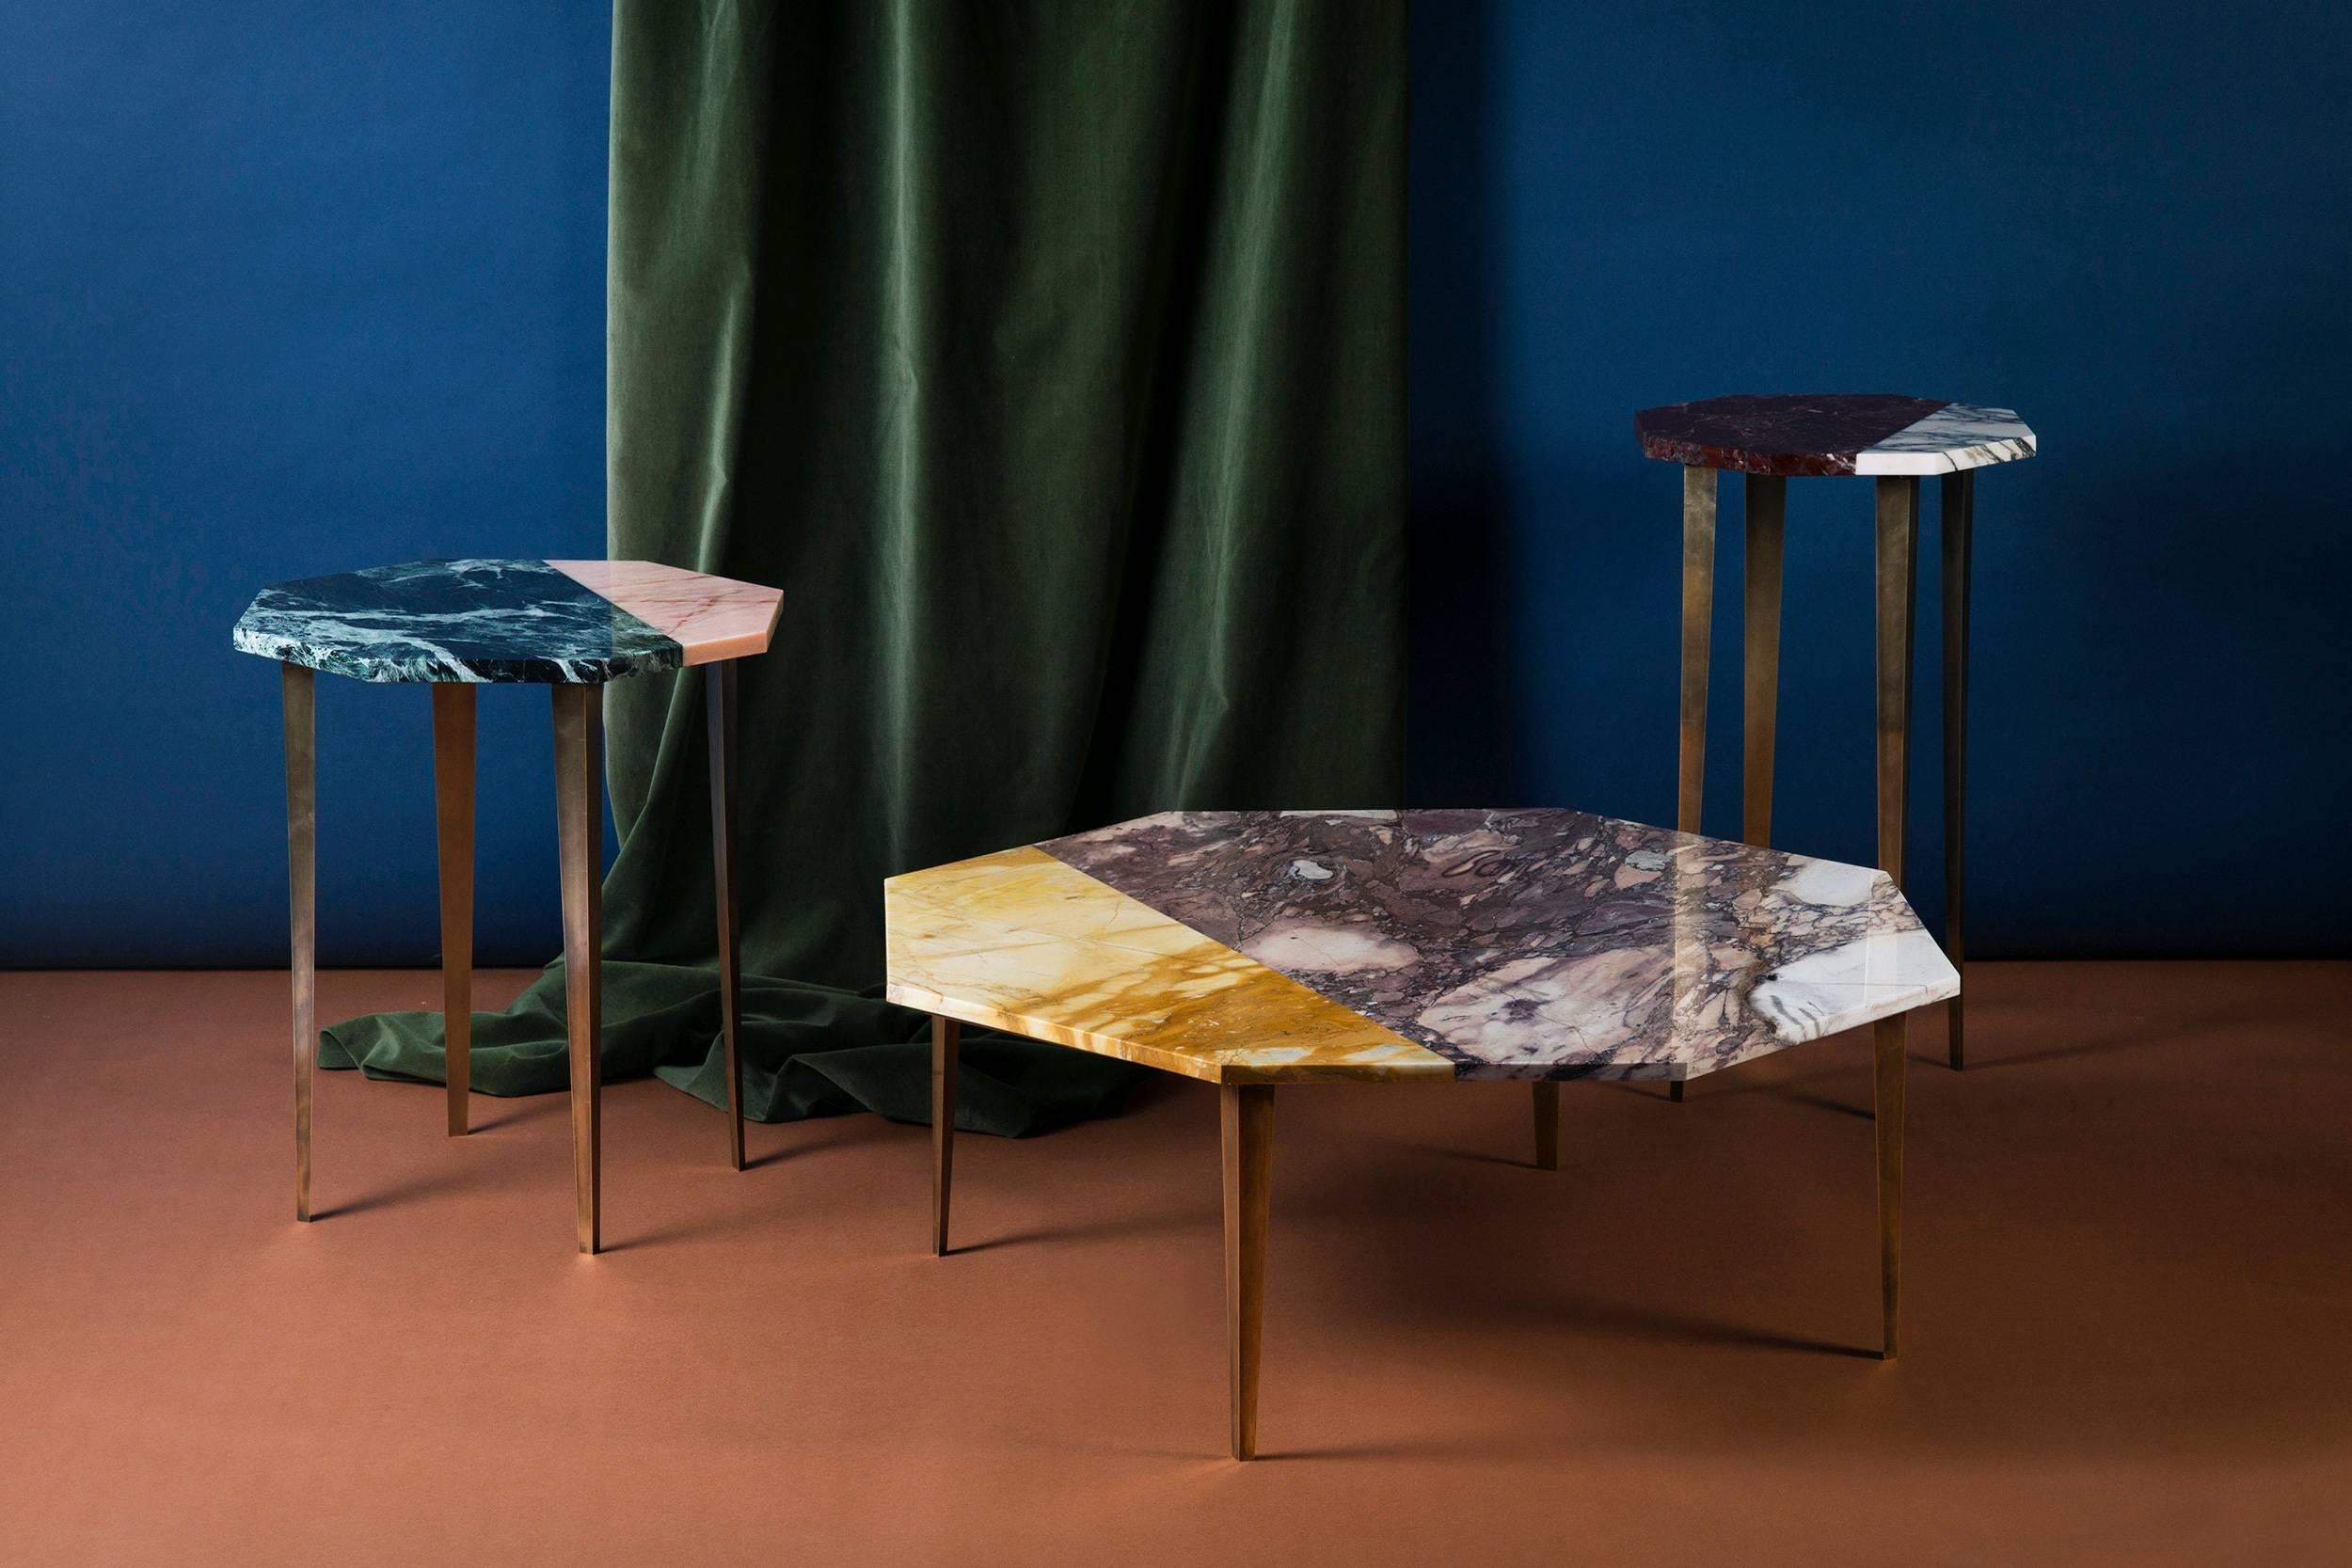 Thierry side table, 45 x 52cm. Verde St Denis and Rose Aurora marble, brass.

Launched at the Salone del Mobile 2017, Campbell-Rey present their Thierry table collection.

Comprised of three tables – a cocktail table, a side table and a coffee